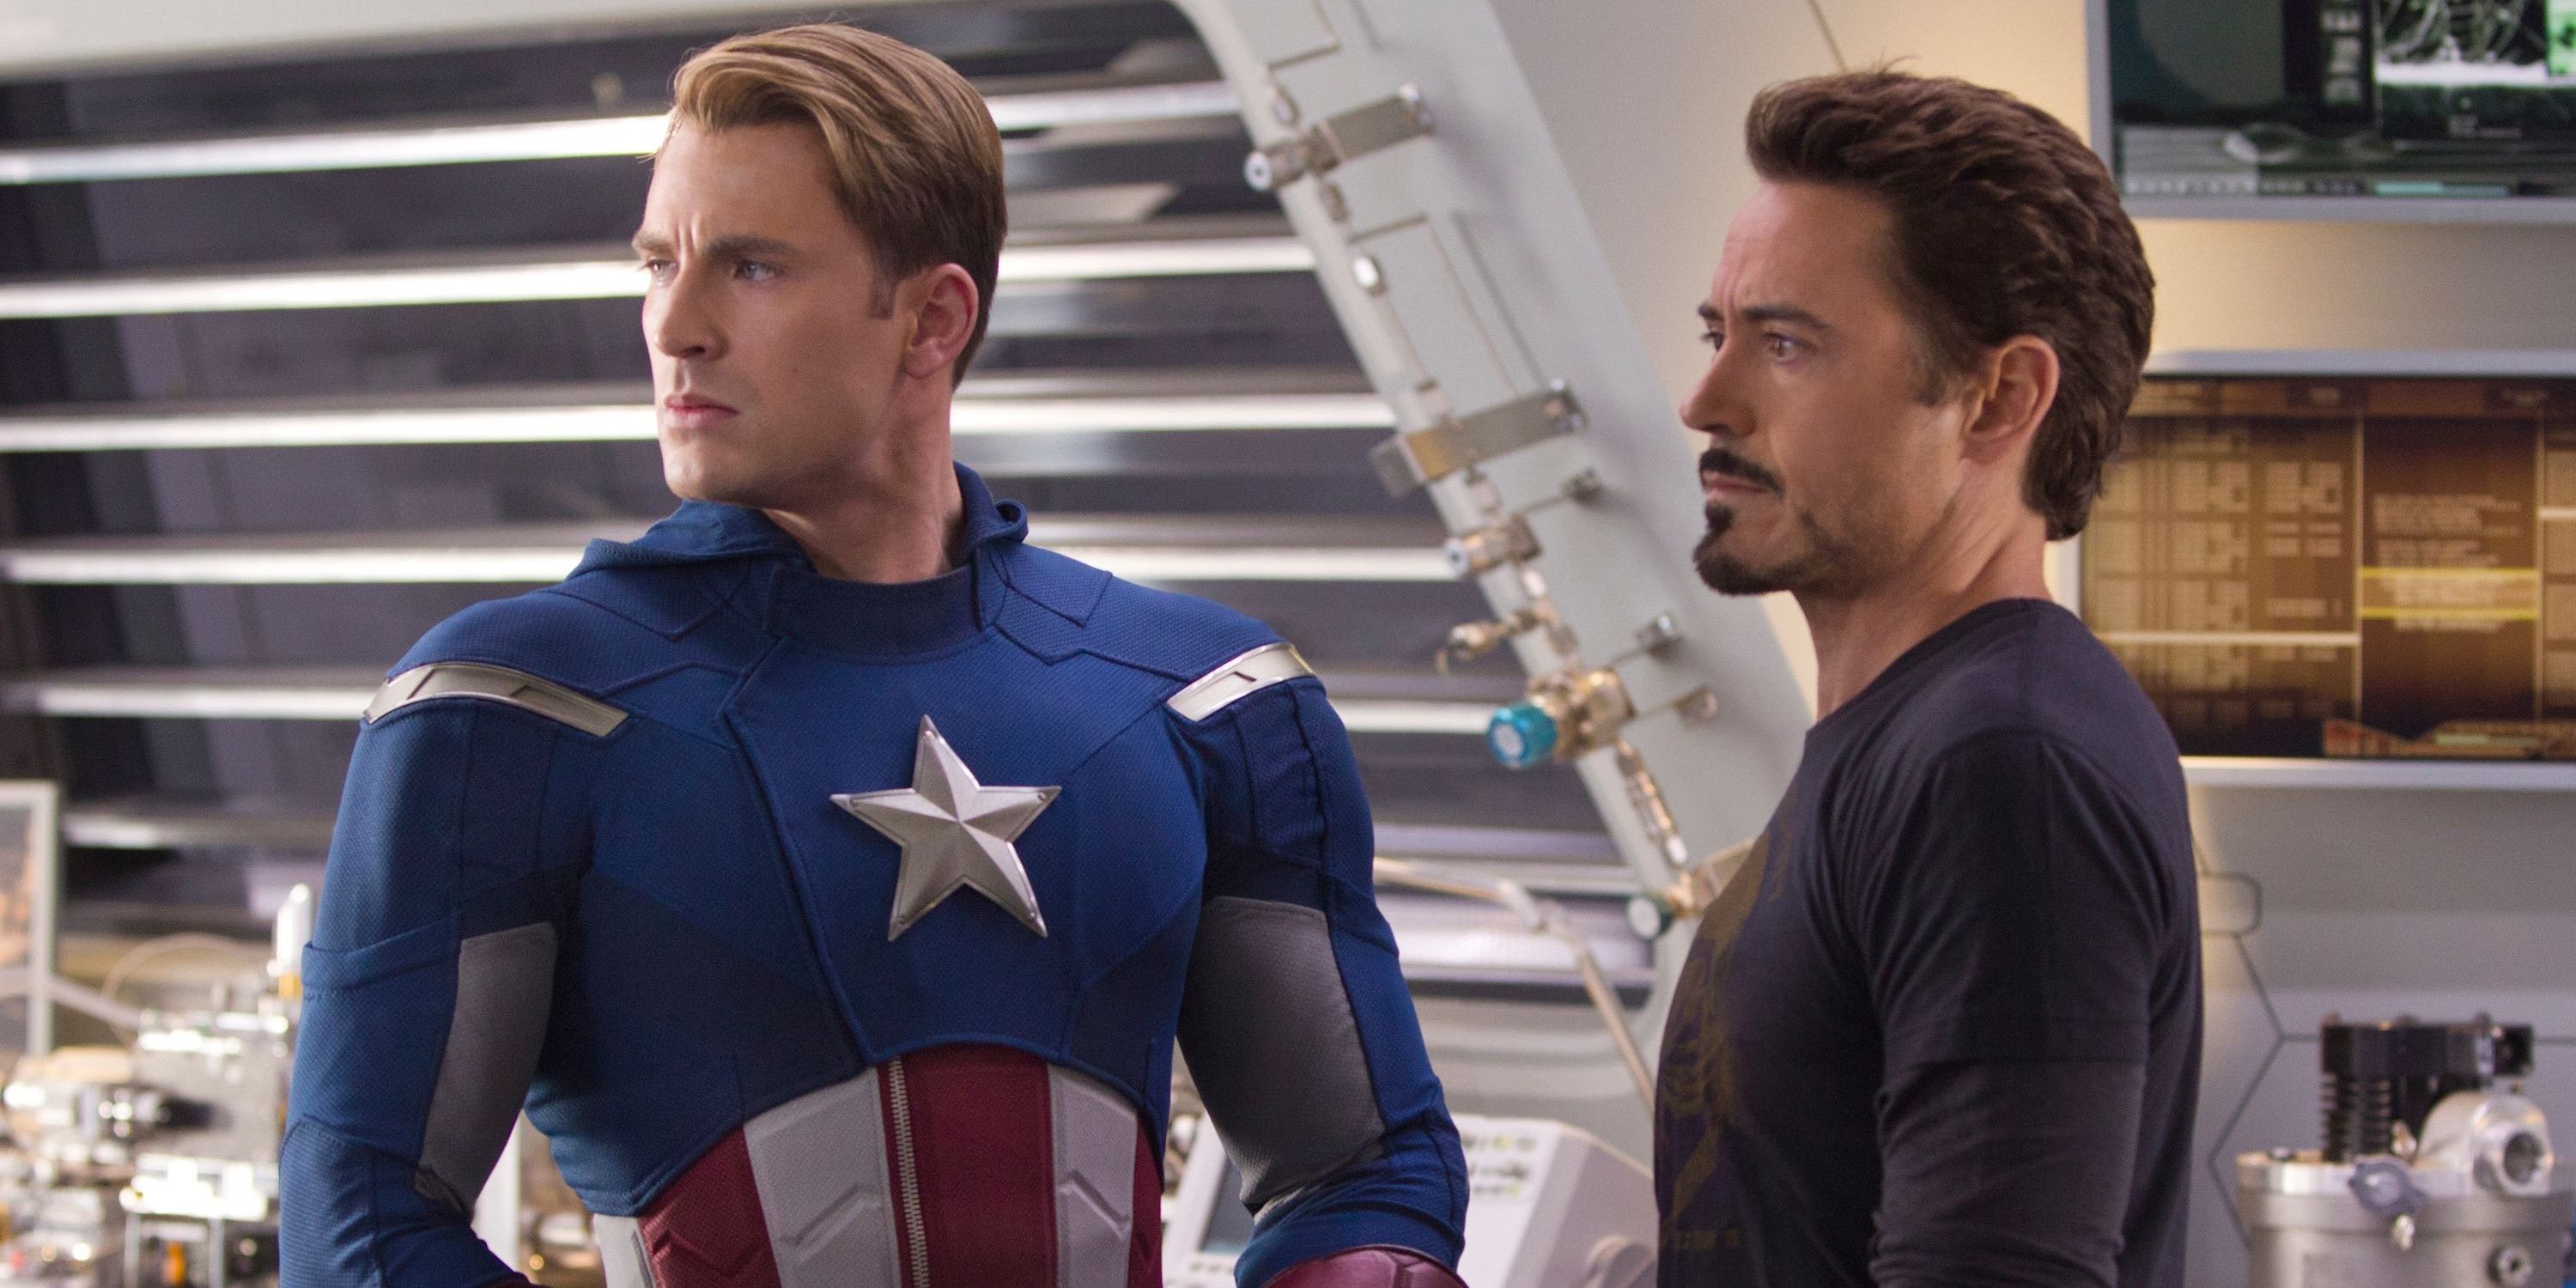 An image of Captain America and Iron Man standing next to each other. Captain America is in his uniform while Iron Man is not